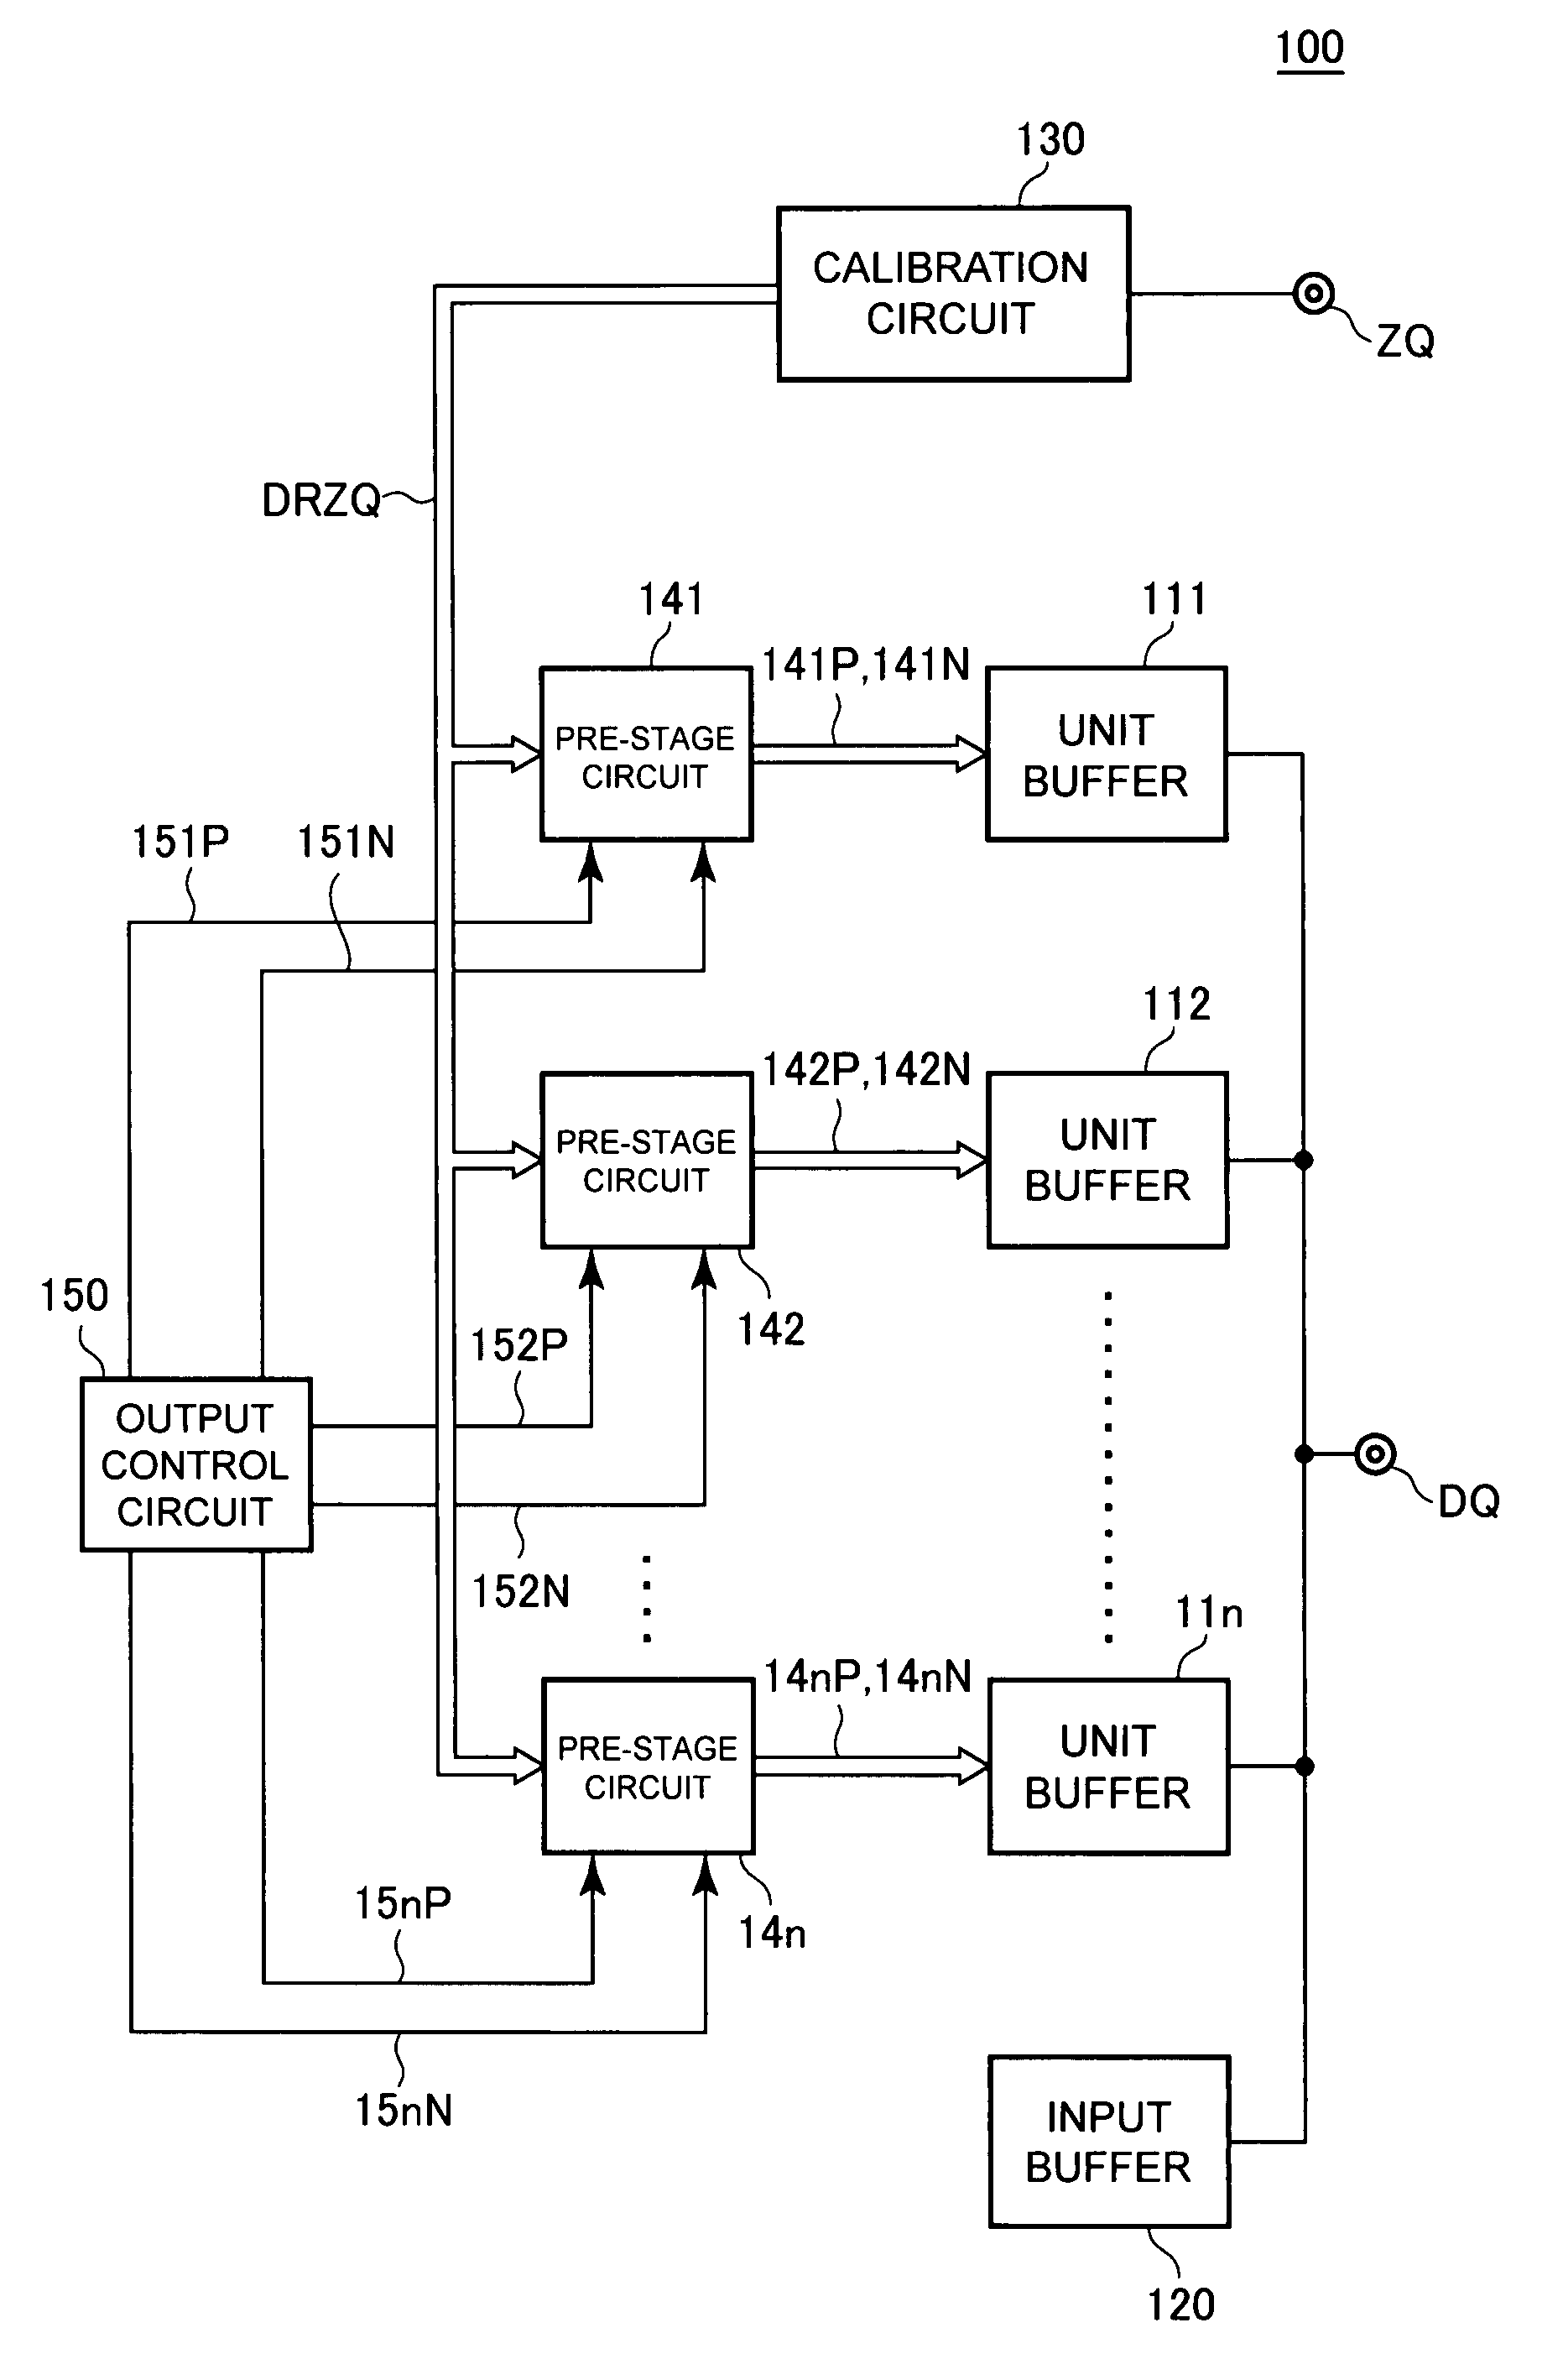 Output circuit of semiconductor device